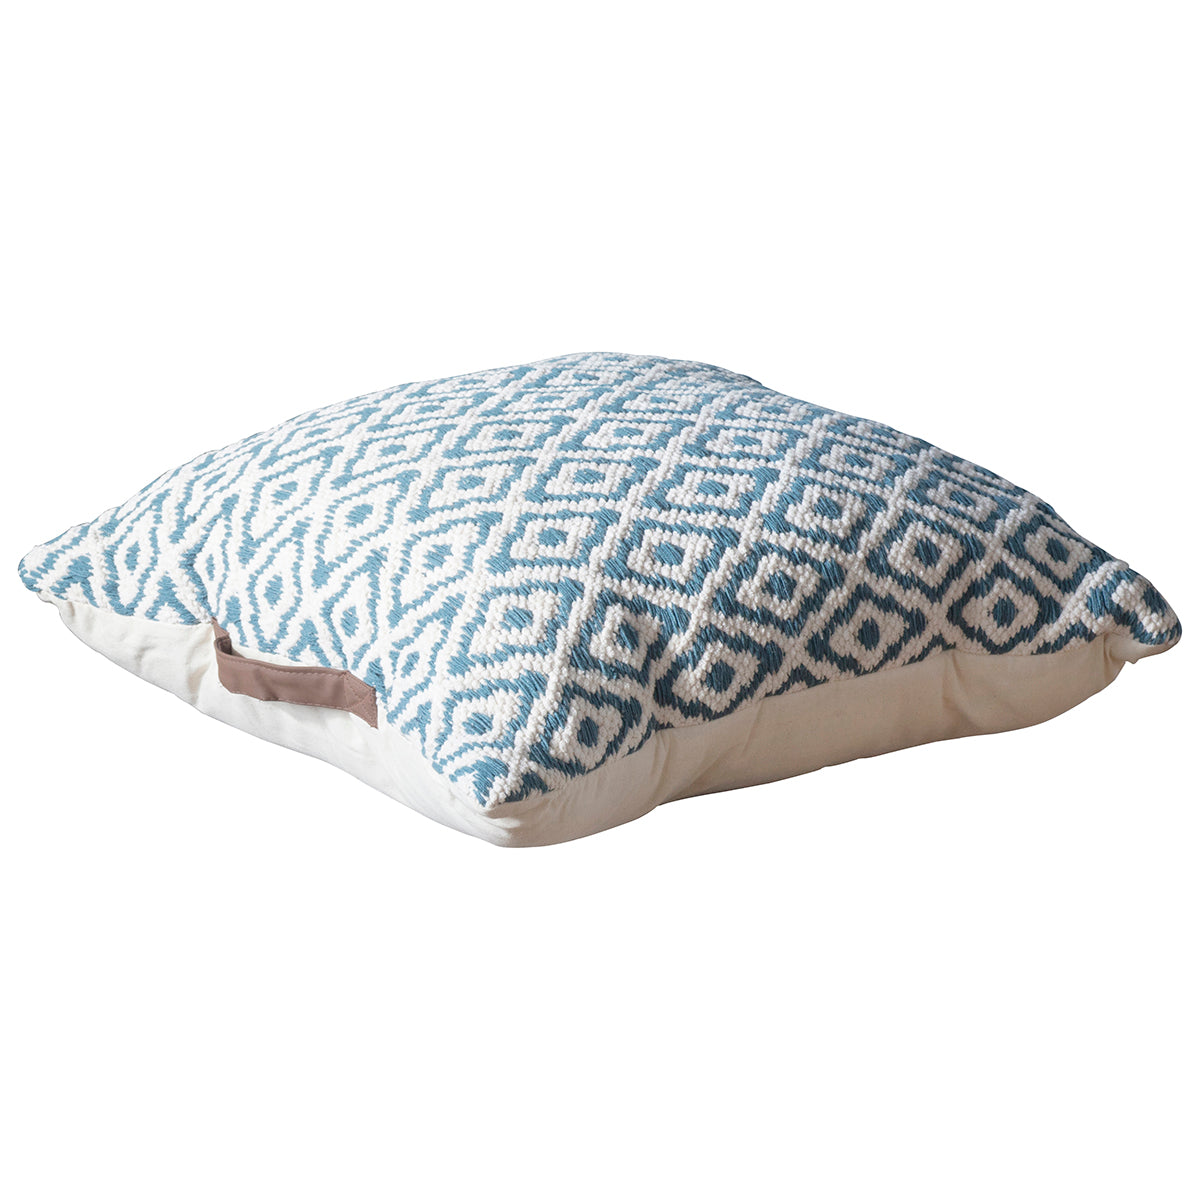 A Sigtuna Floor Cushion Teal 750x750mm with a geometric pattern for home furniture.